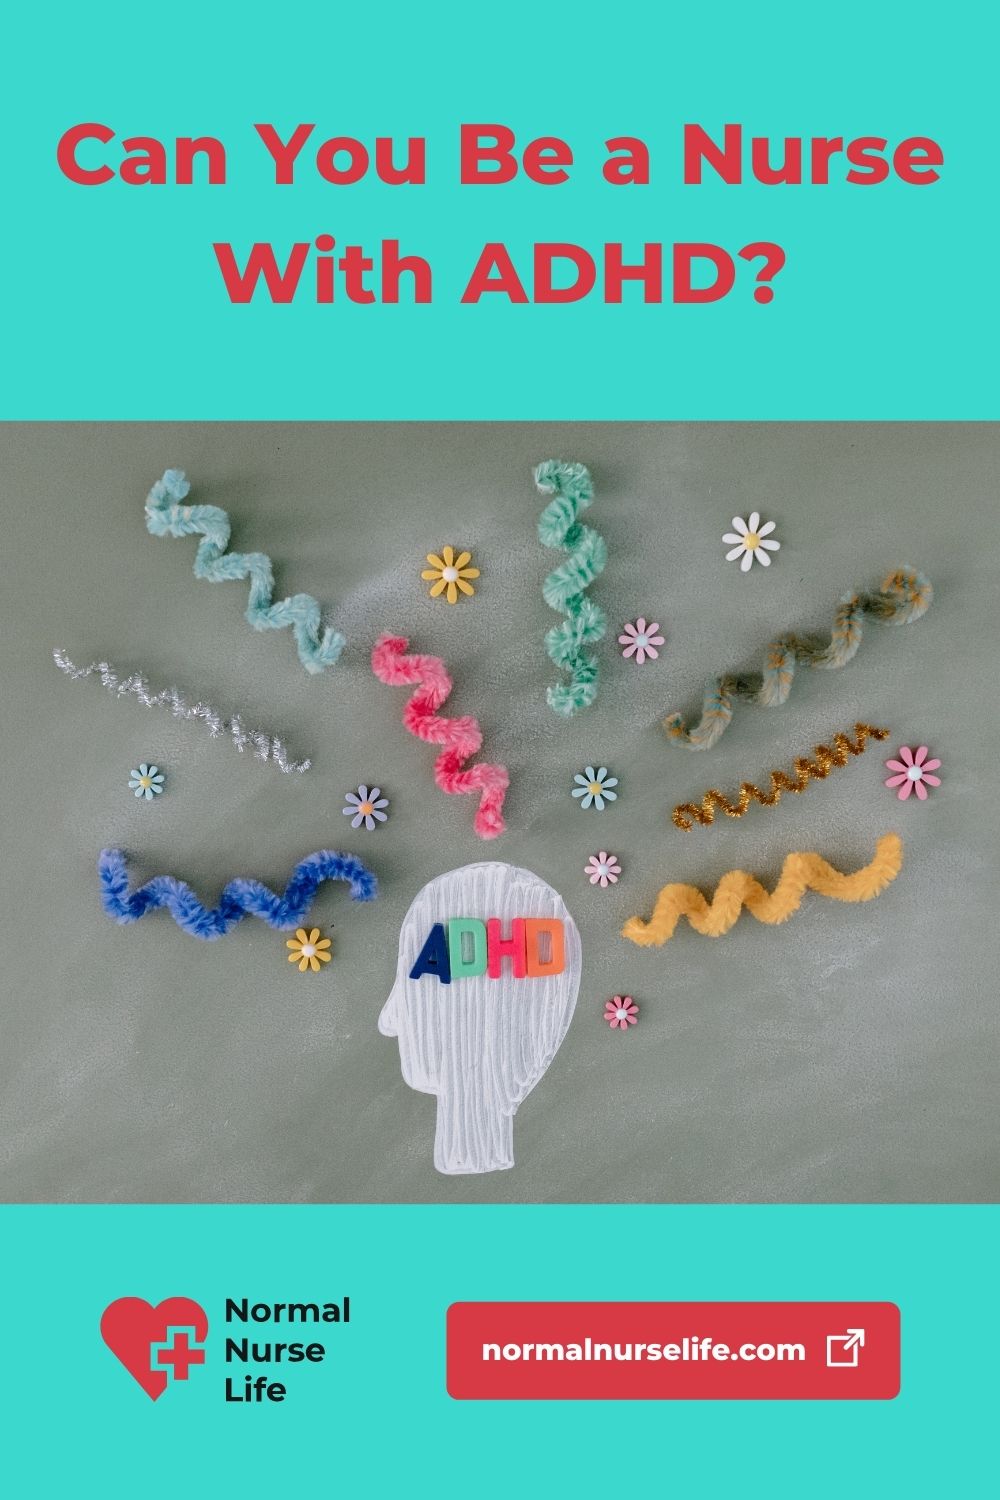 Can you be a nurse if you have ADHD